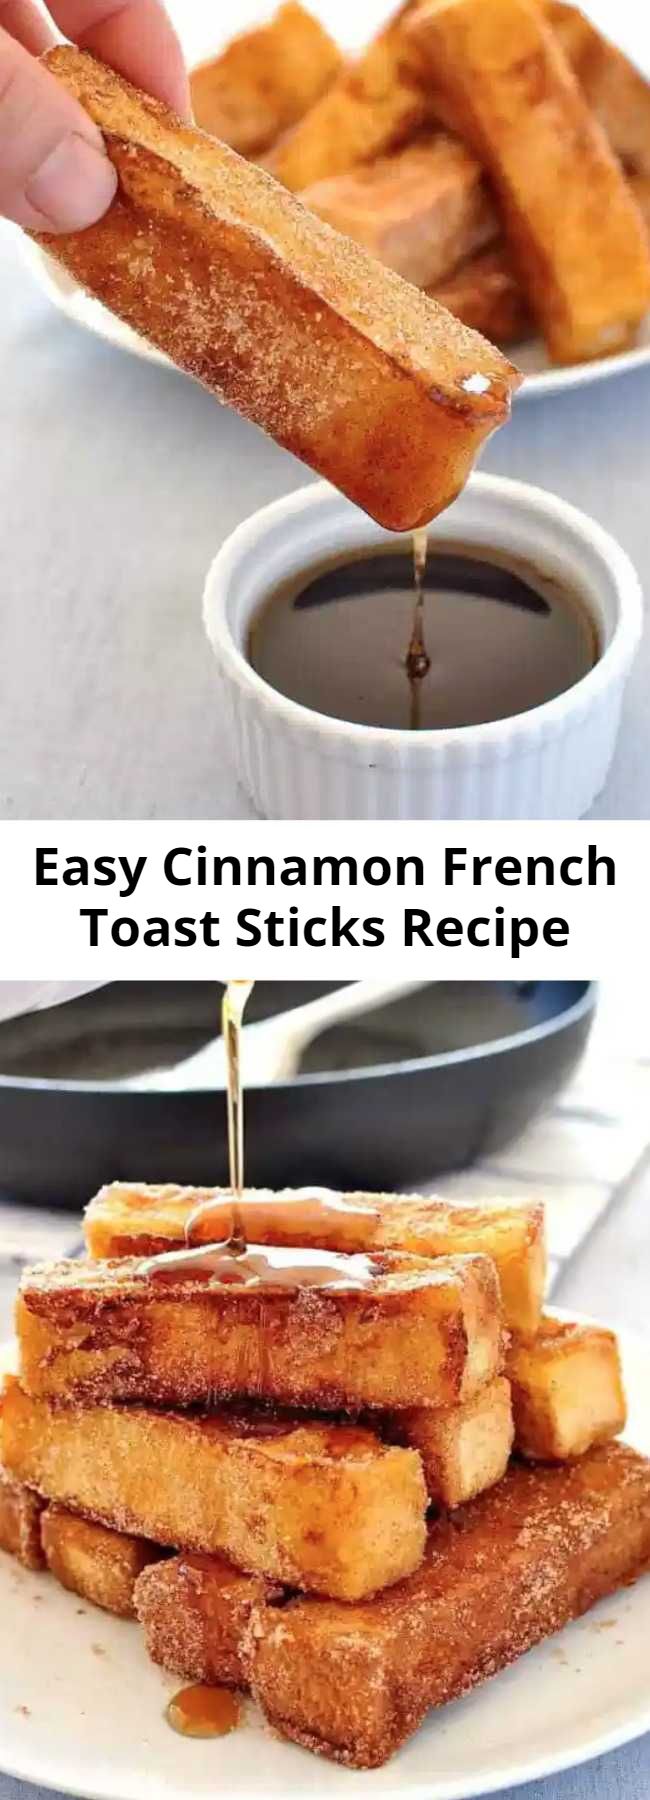 Easy Cinnamon French Toast Sticks Recipe - Eat it with your fingers (tick), tastes like cinnamon doughnuts but a whole lot healthier (double tick)!